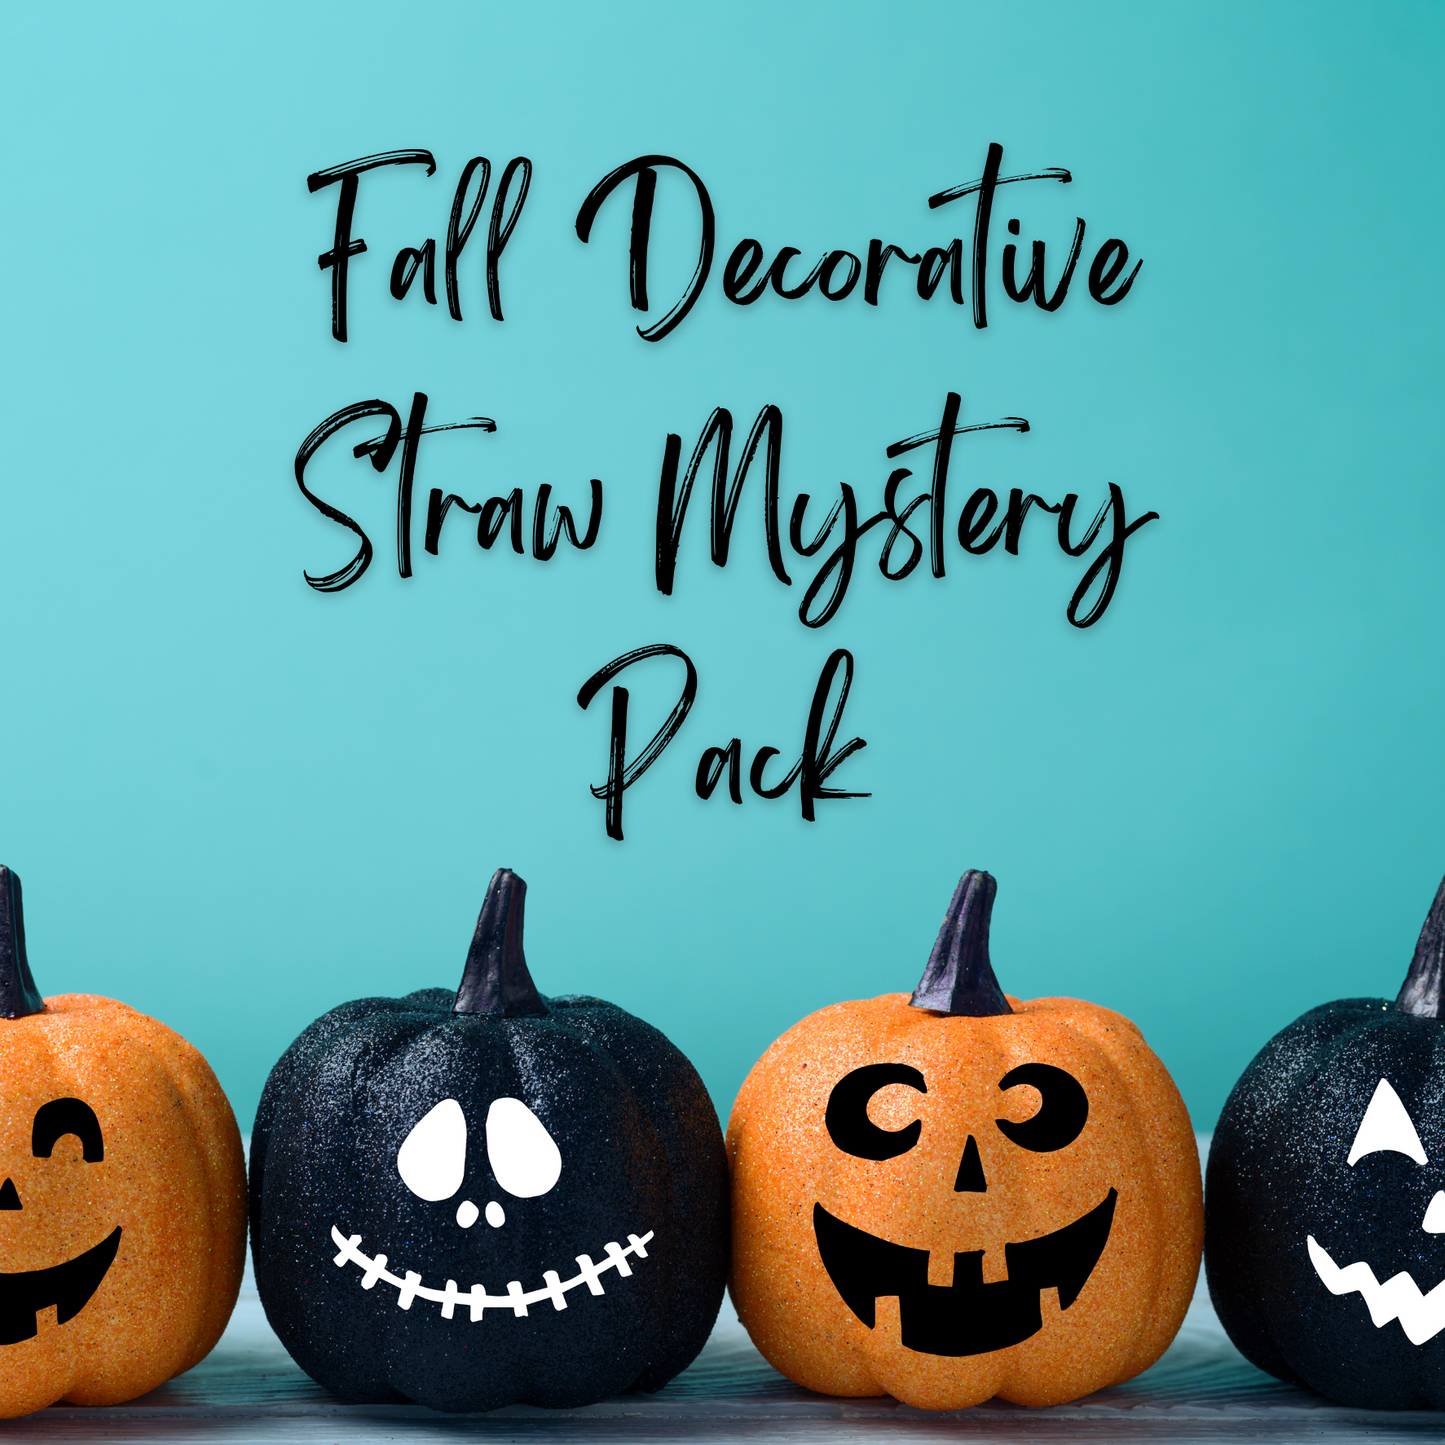 Fall Decorative Straw Mystery Pack (Set of 5)